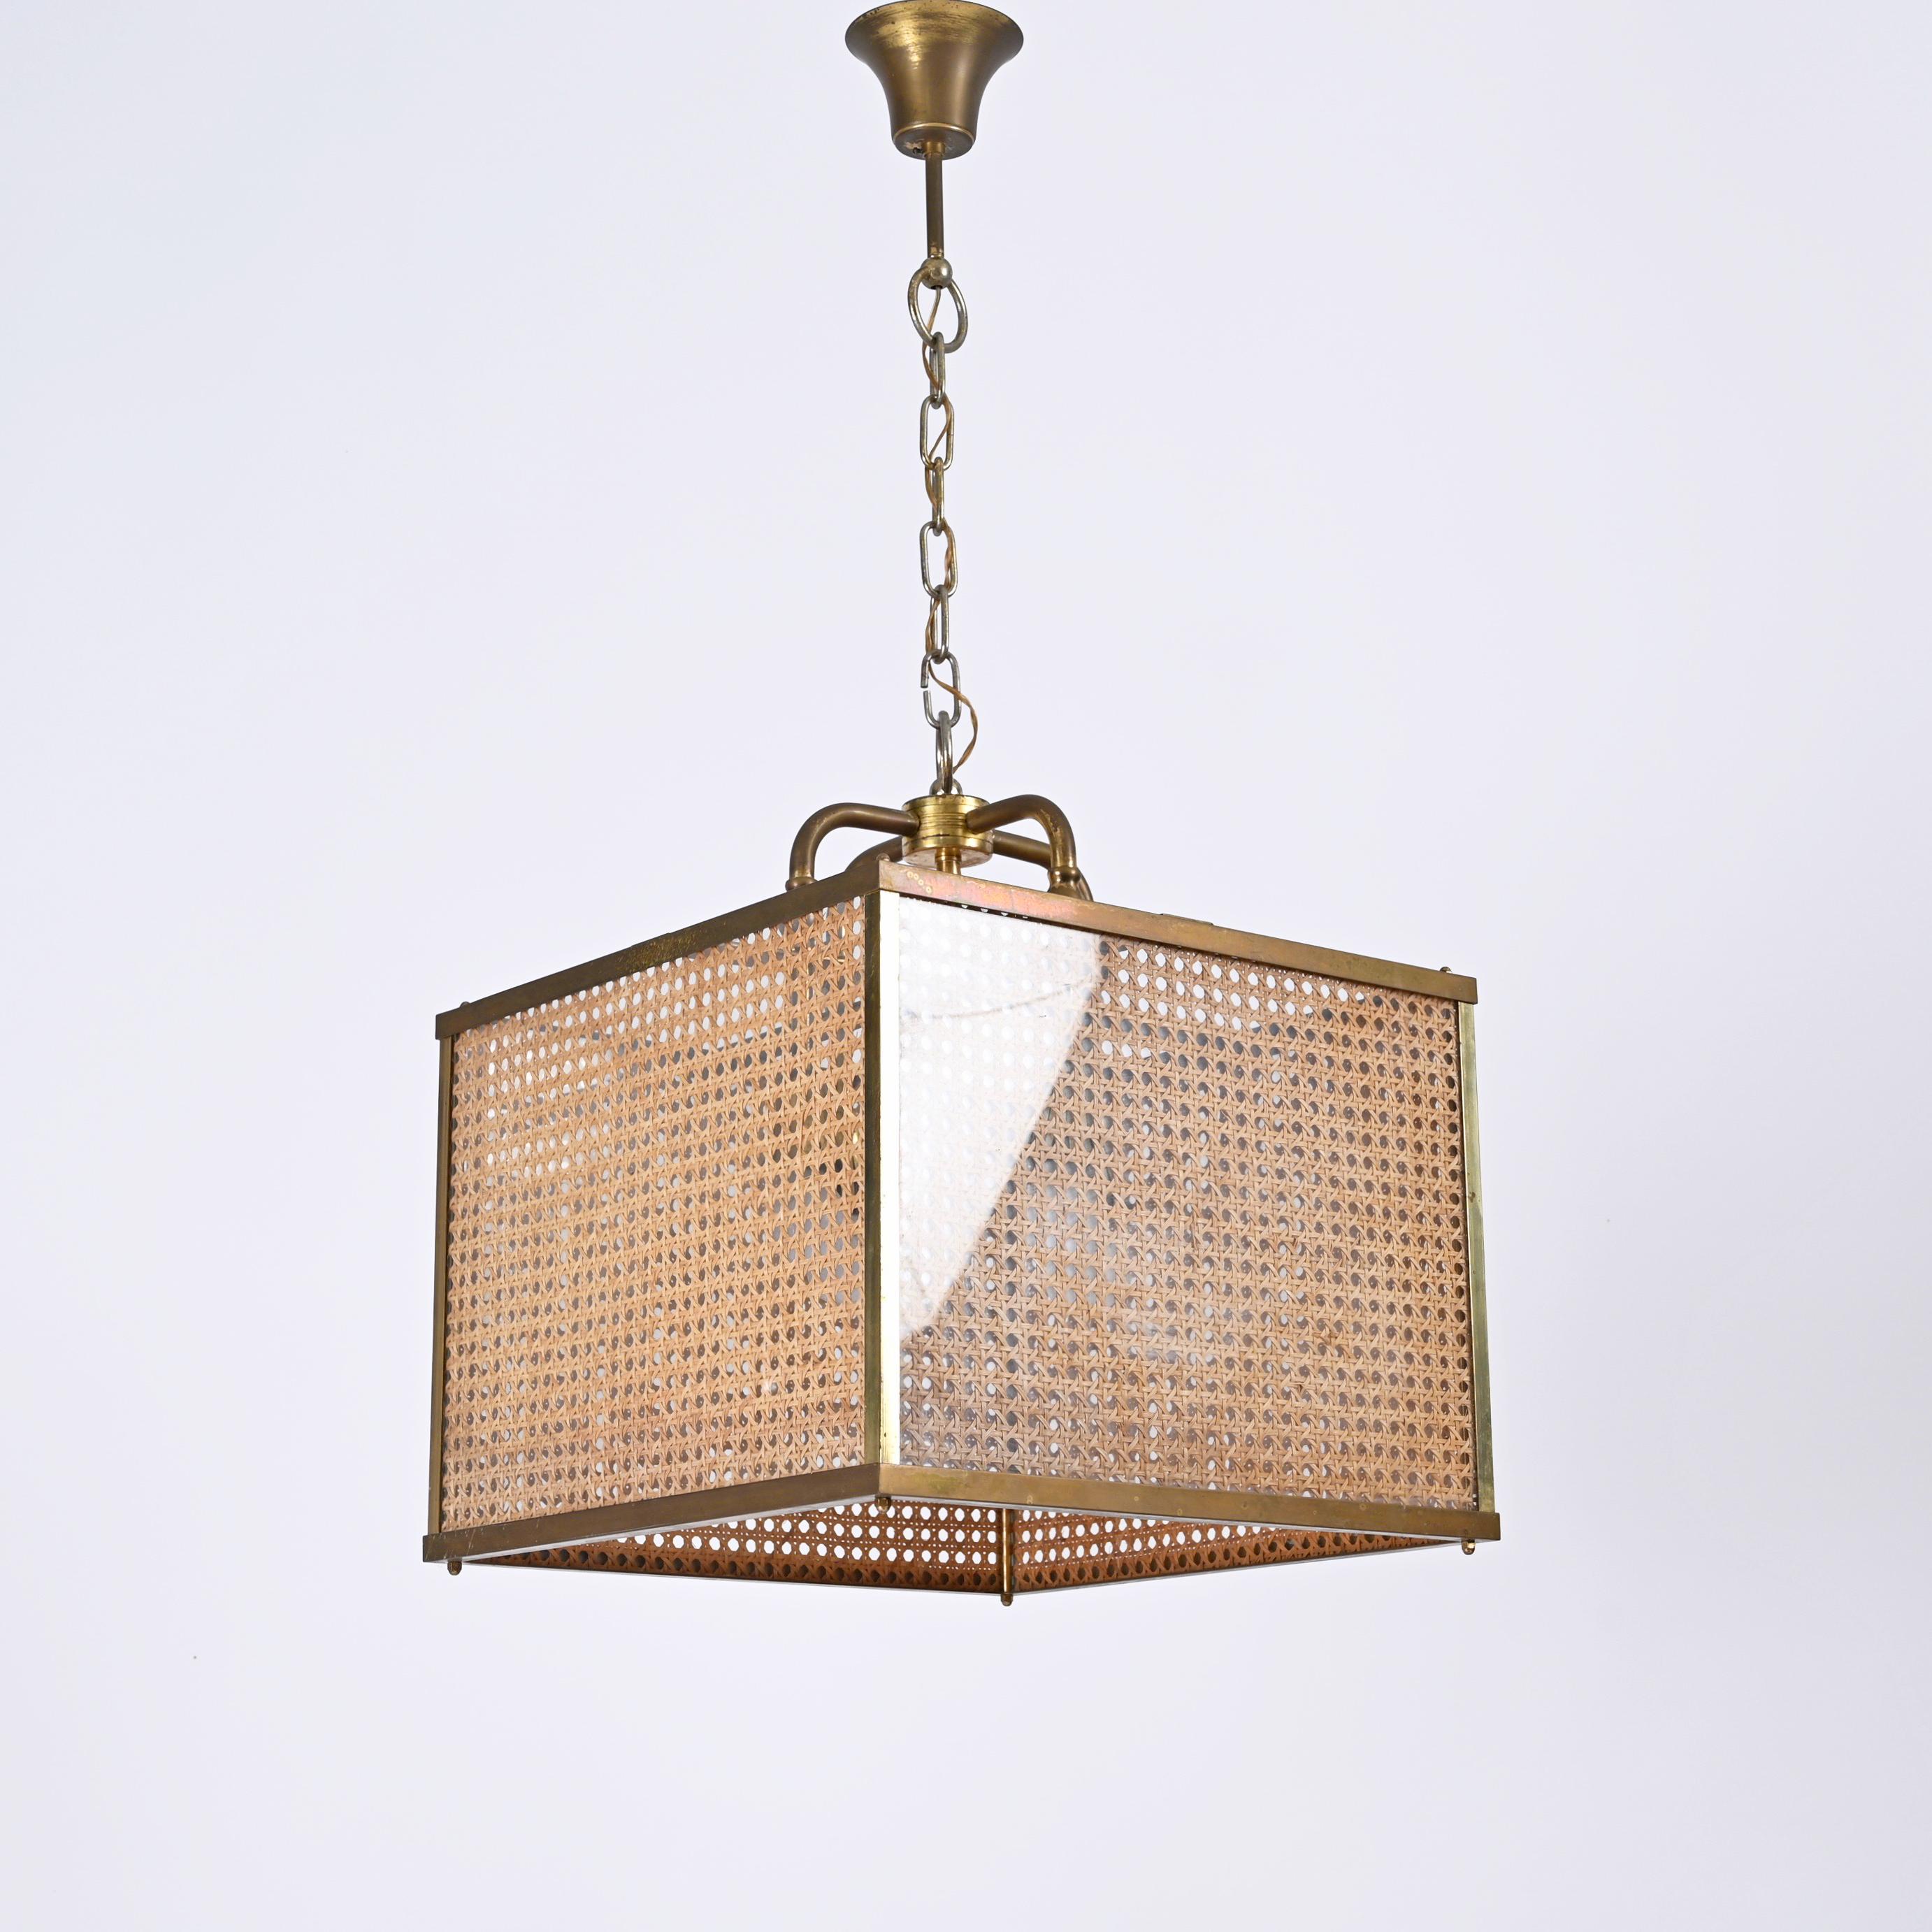 Brass, Vienna Straw Wicker and Glass Square Chandelier Lamp, Italy, 1950s For Sale 5